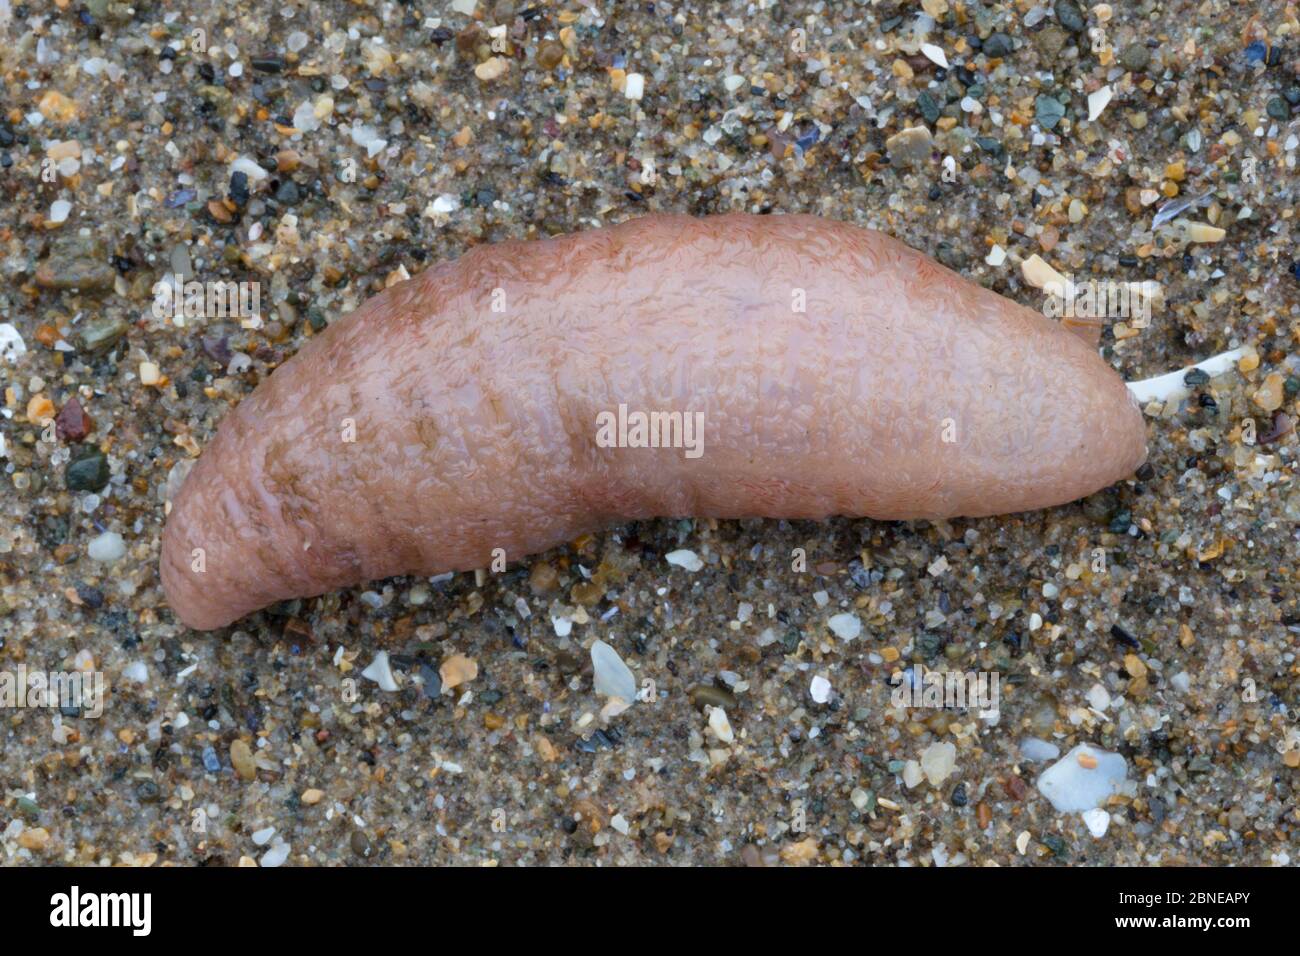 Sea cucumber (Thyone fusus) washed up on beach following heavy storms.  Anglesey, Wales, UK. December. Stock Photo